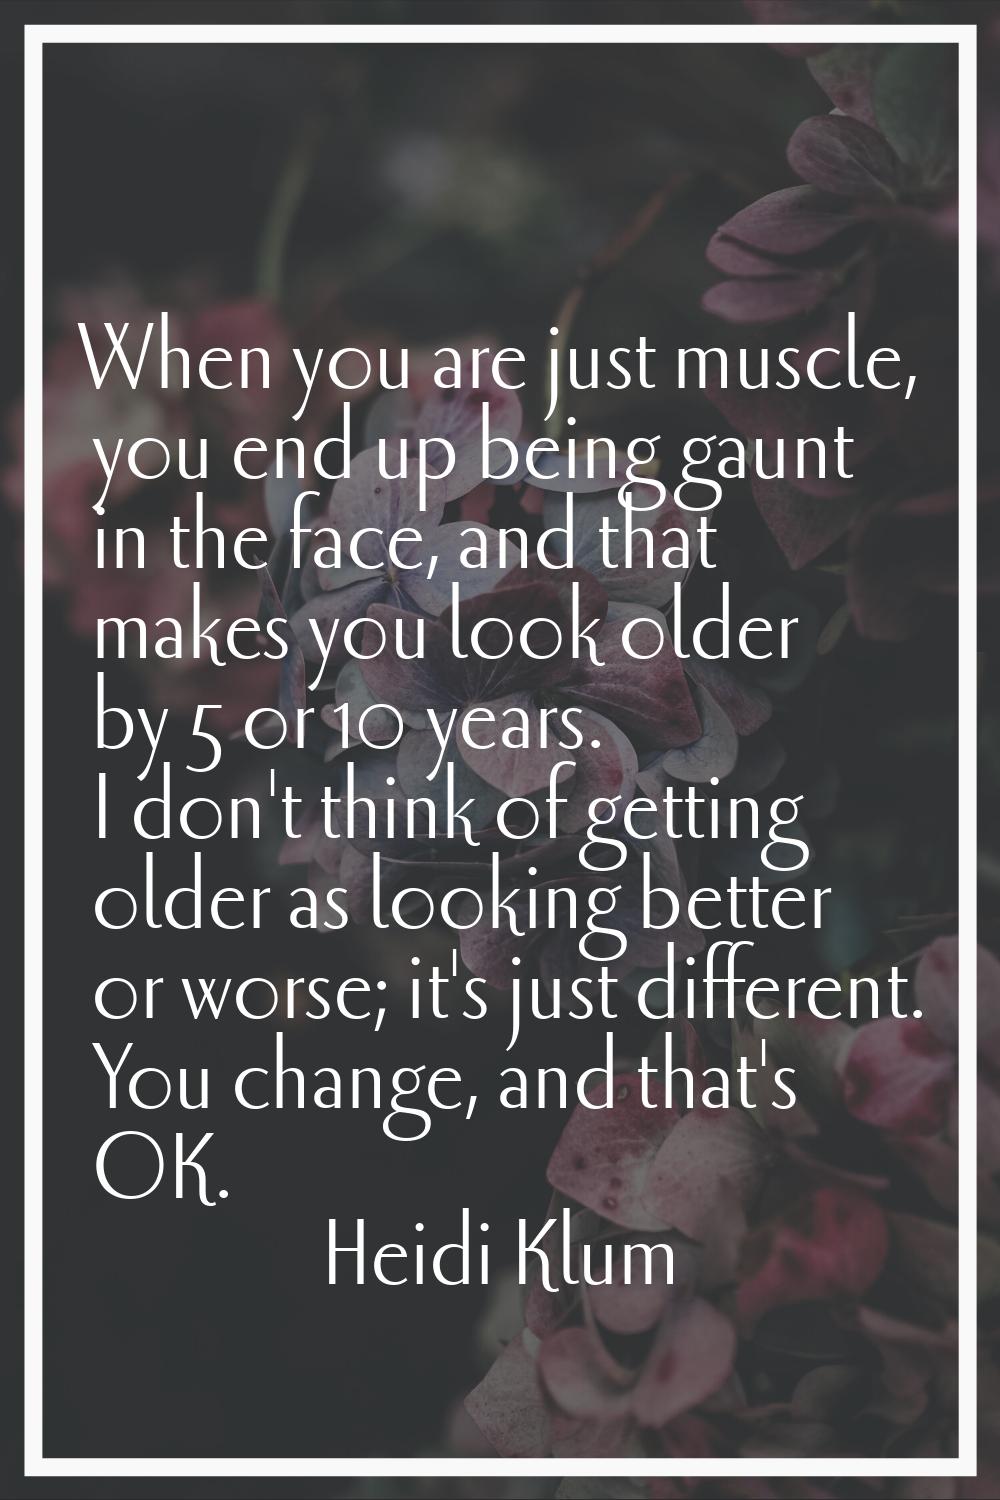 When you are just muscle, you end up being gaunt in the face, and that makes you look older by 5 or